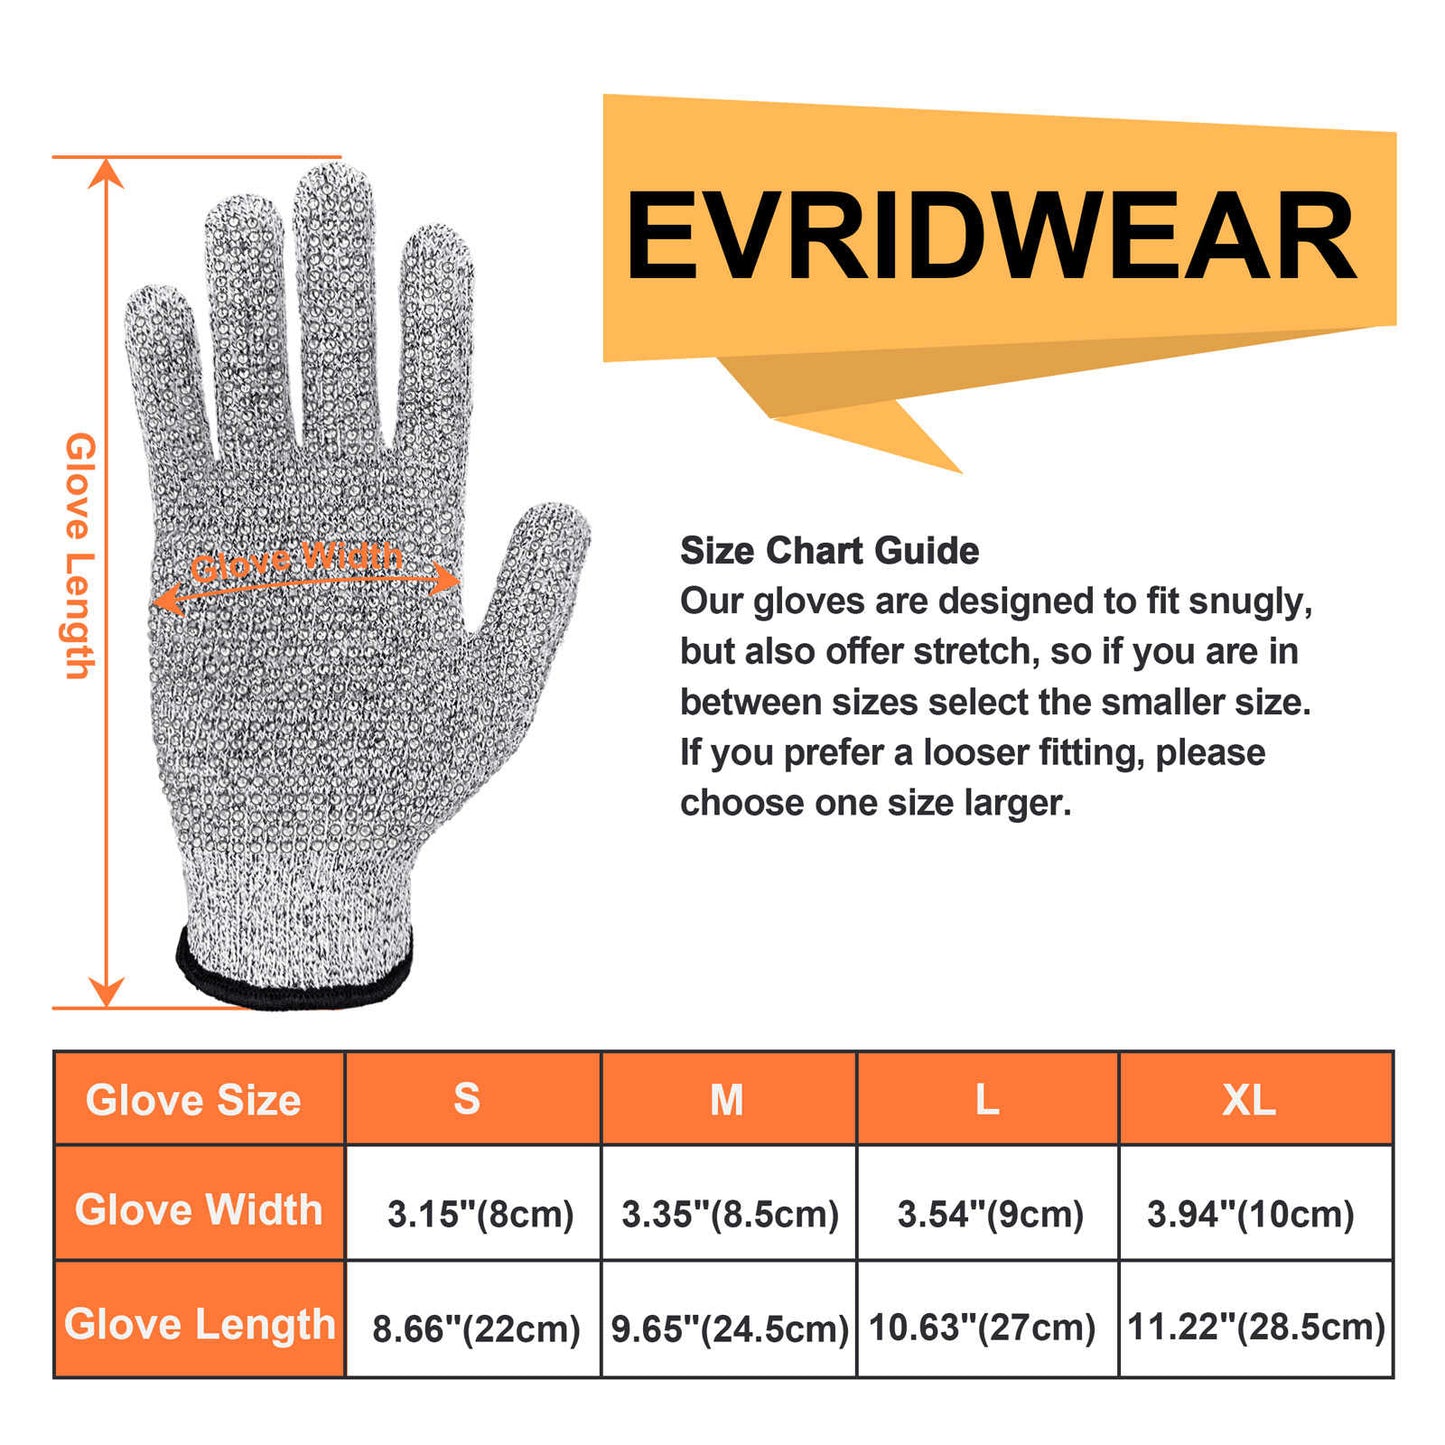 EvridWear 1 Pair Cut Resistant Gloves, Food Grade, Level 5 Protection, HPPE (Gray)